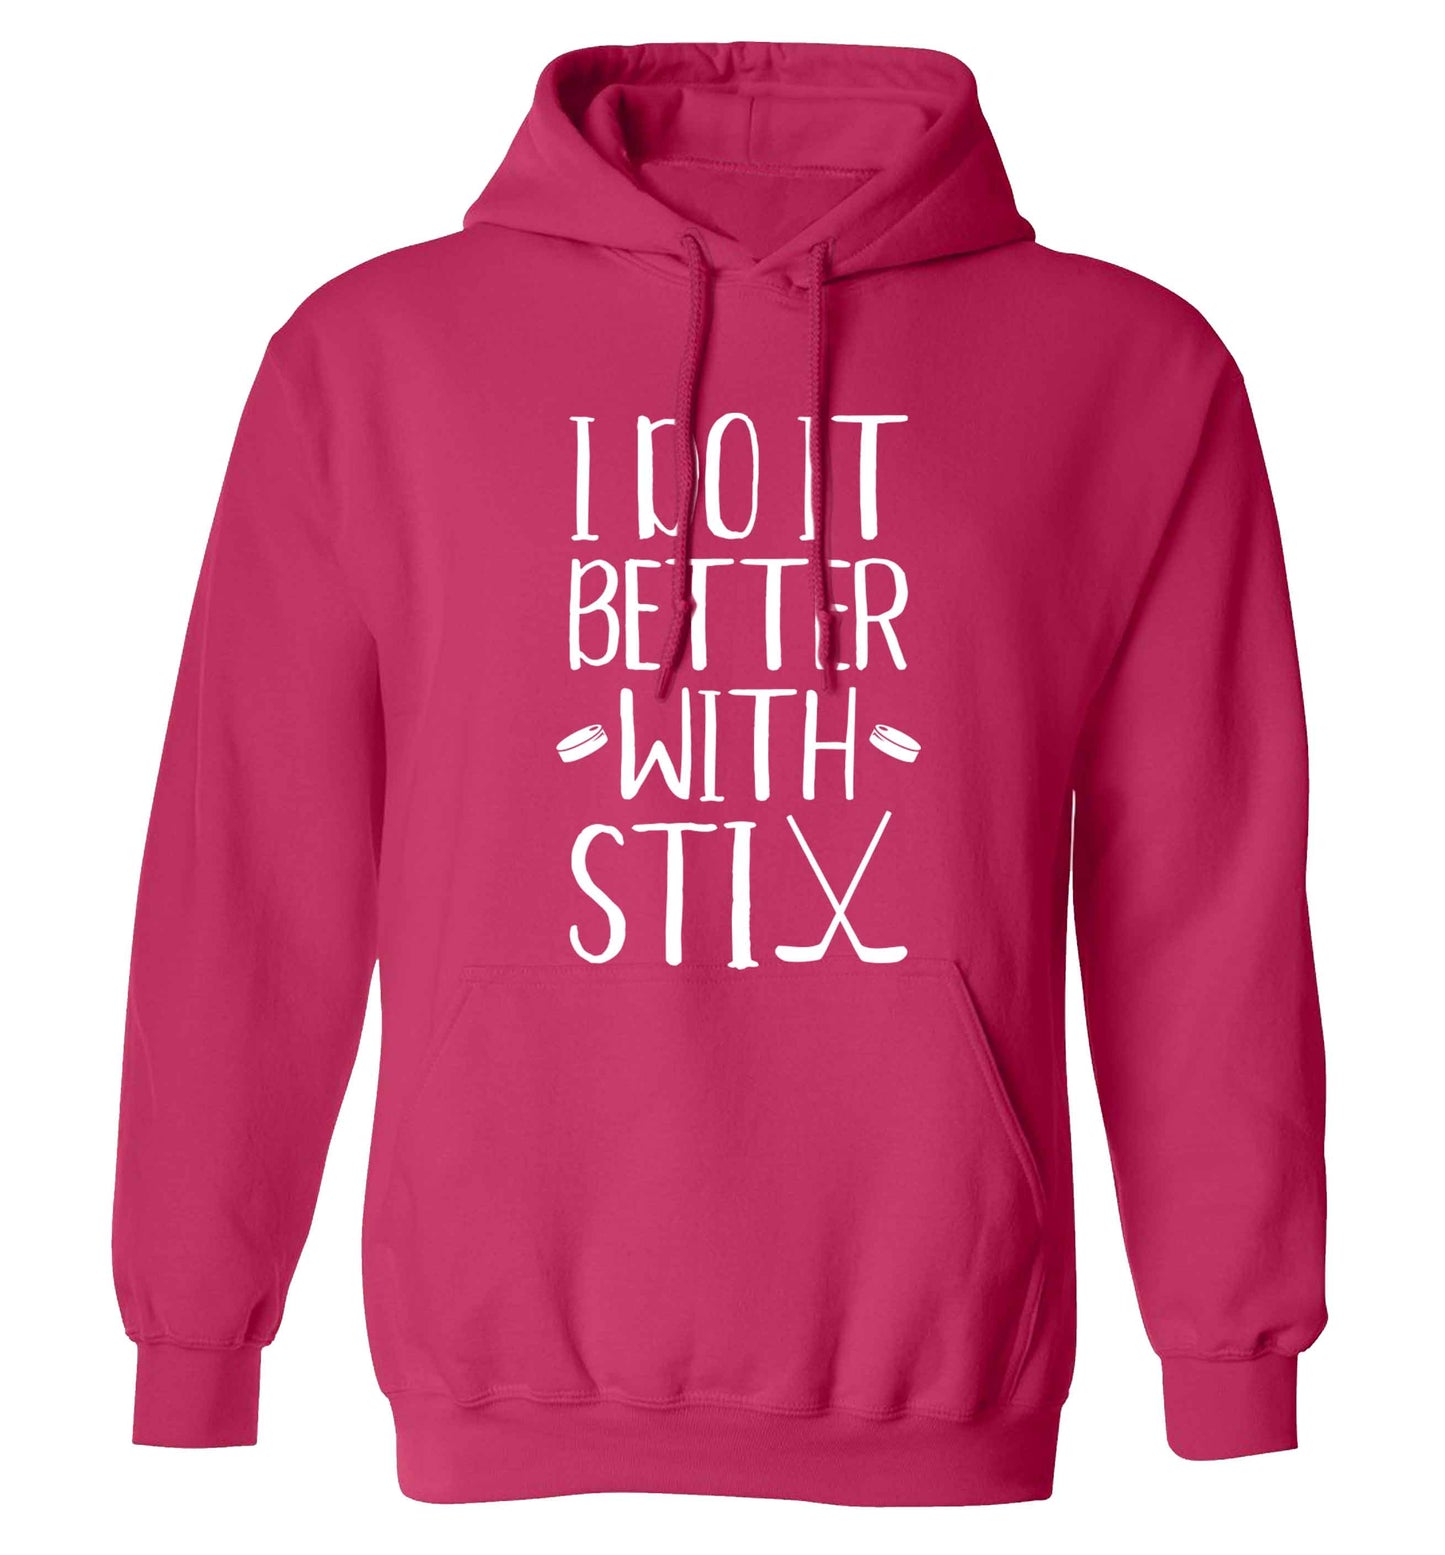 I do it better with stix (hockey) adults unisex pink hoodie 2XL